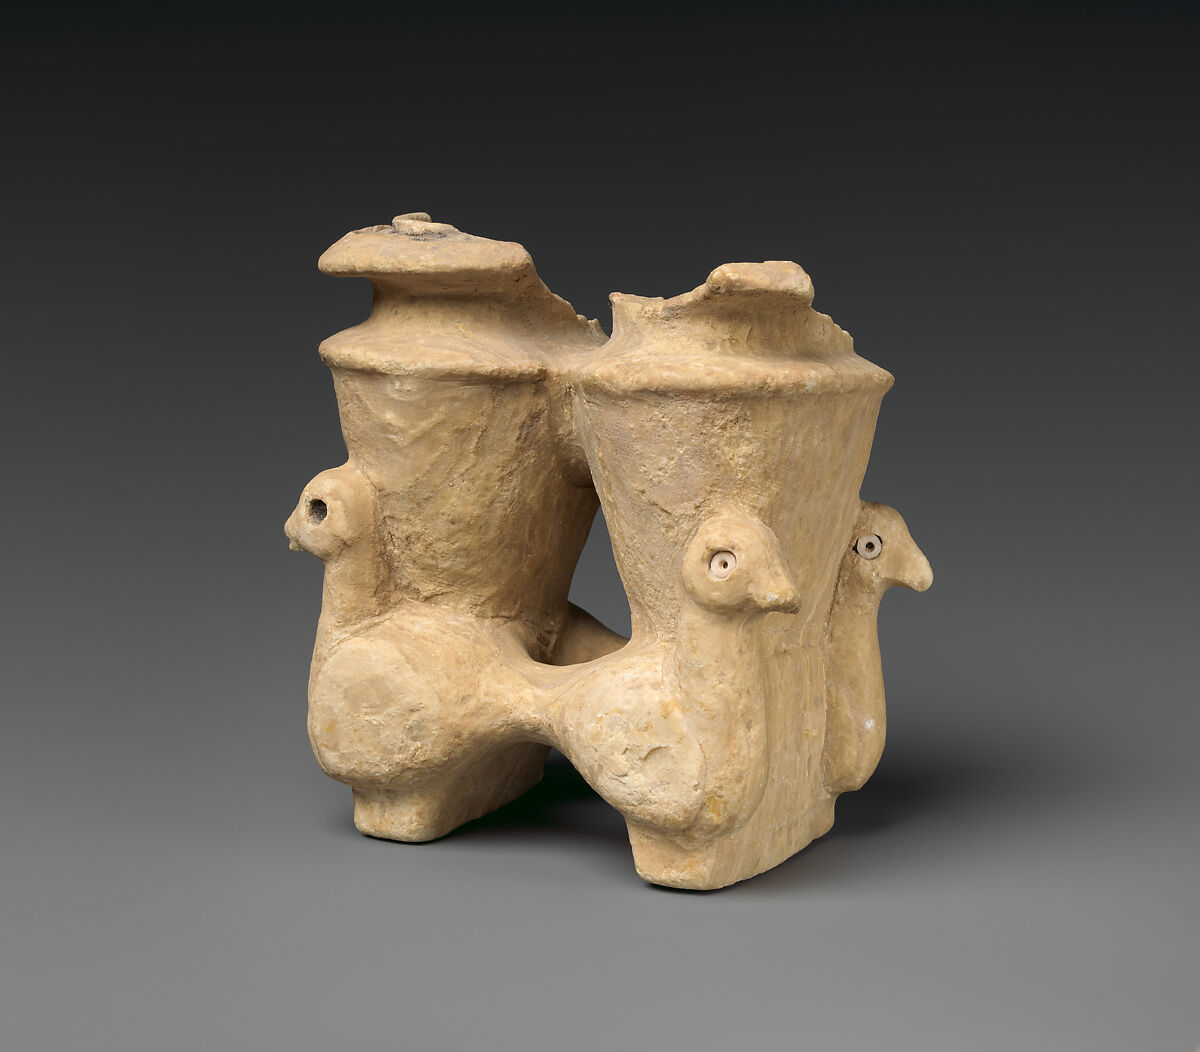 Double vessel with duck-shaped supports, Gypsum alabaster, shell inlay, bitumen, Sumerian 